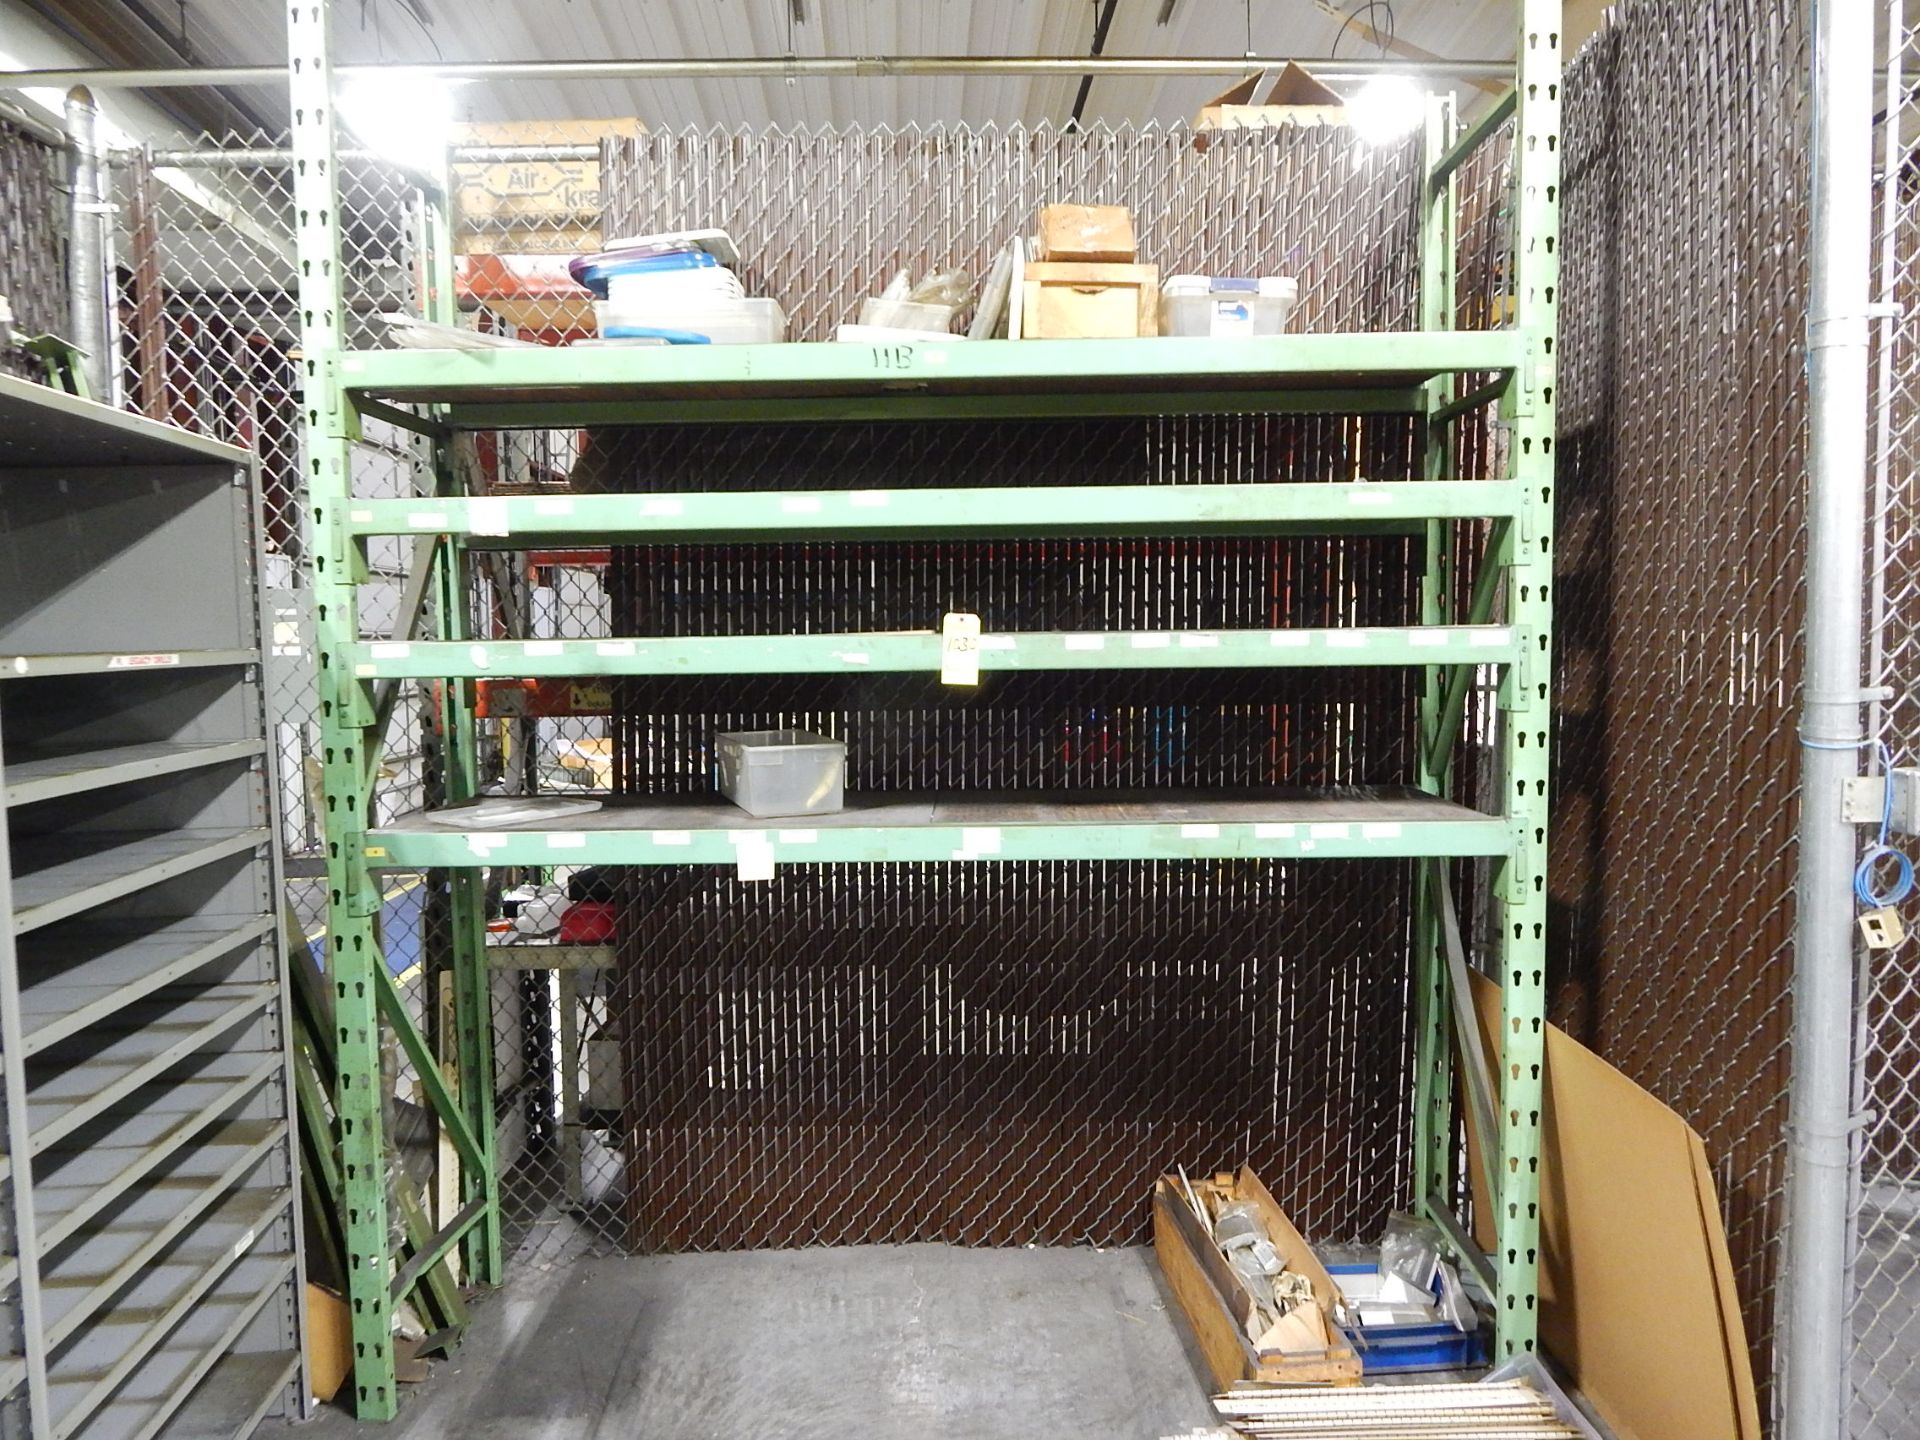 Pallet Shelving, (1) Section, 2 Uprights, 8 Cross Beams, 10' Height, 24" Deep, 96" Wide, 3" Beams